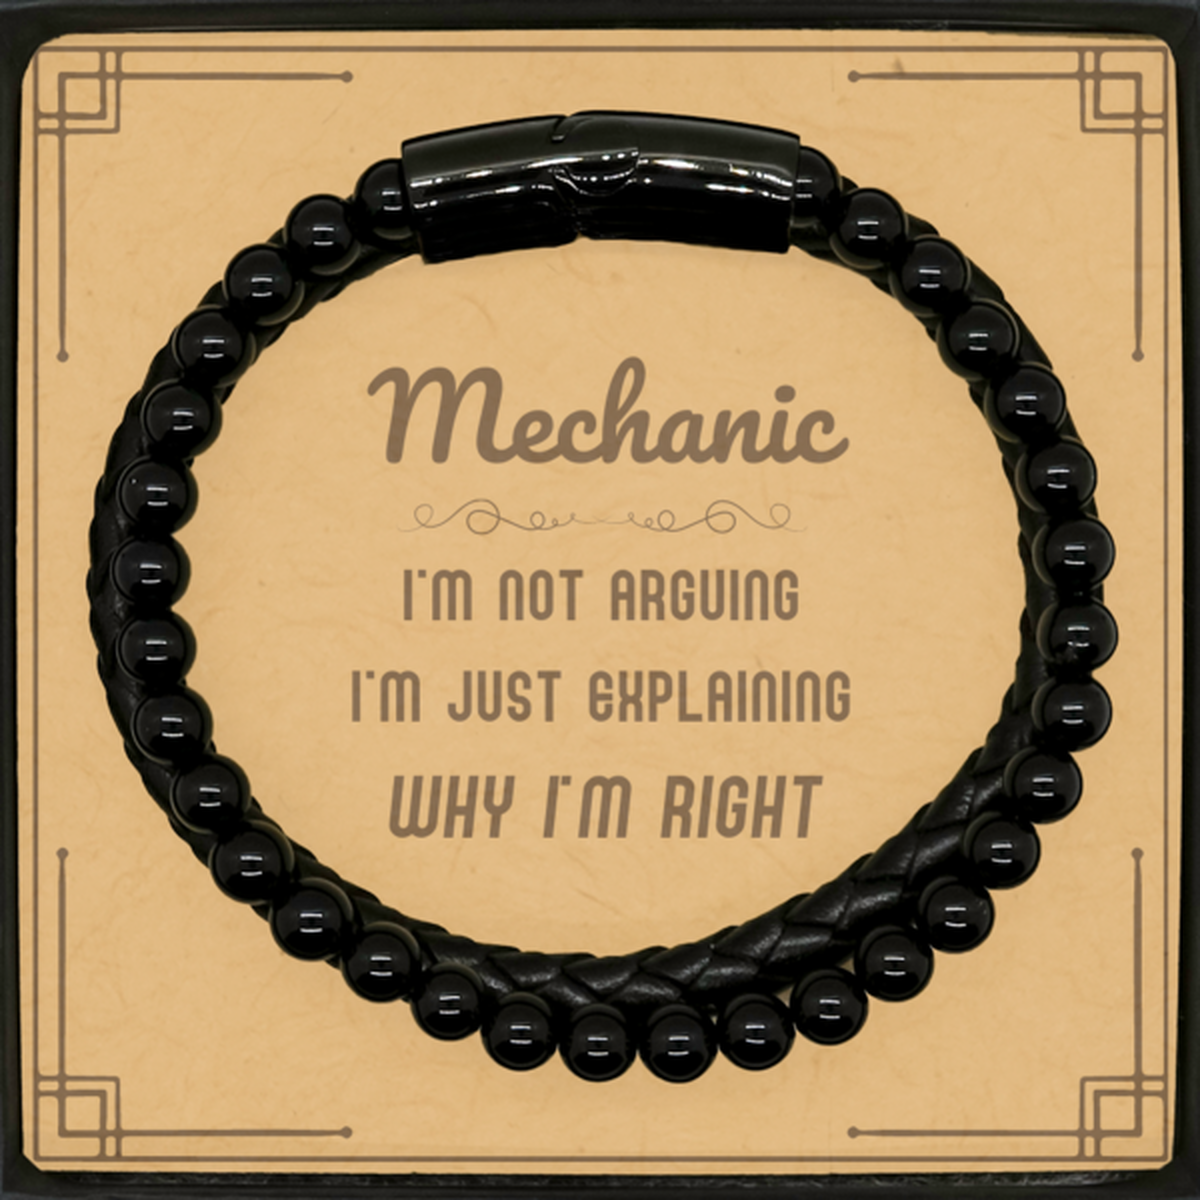 Mechanic I'm not Arguing. I'm Just Explaining Why I'm RIGHT Stone Leather Bracelets, Funny Saying Quote Mechanic Gifts For Mechanic Message Card Graduation Birthday Christmas Gifts for Men Women Coworker